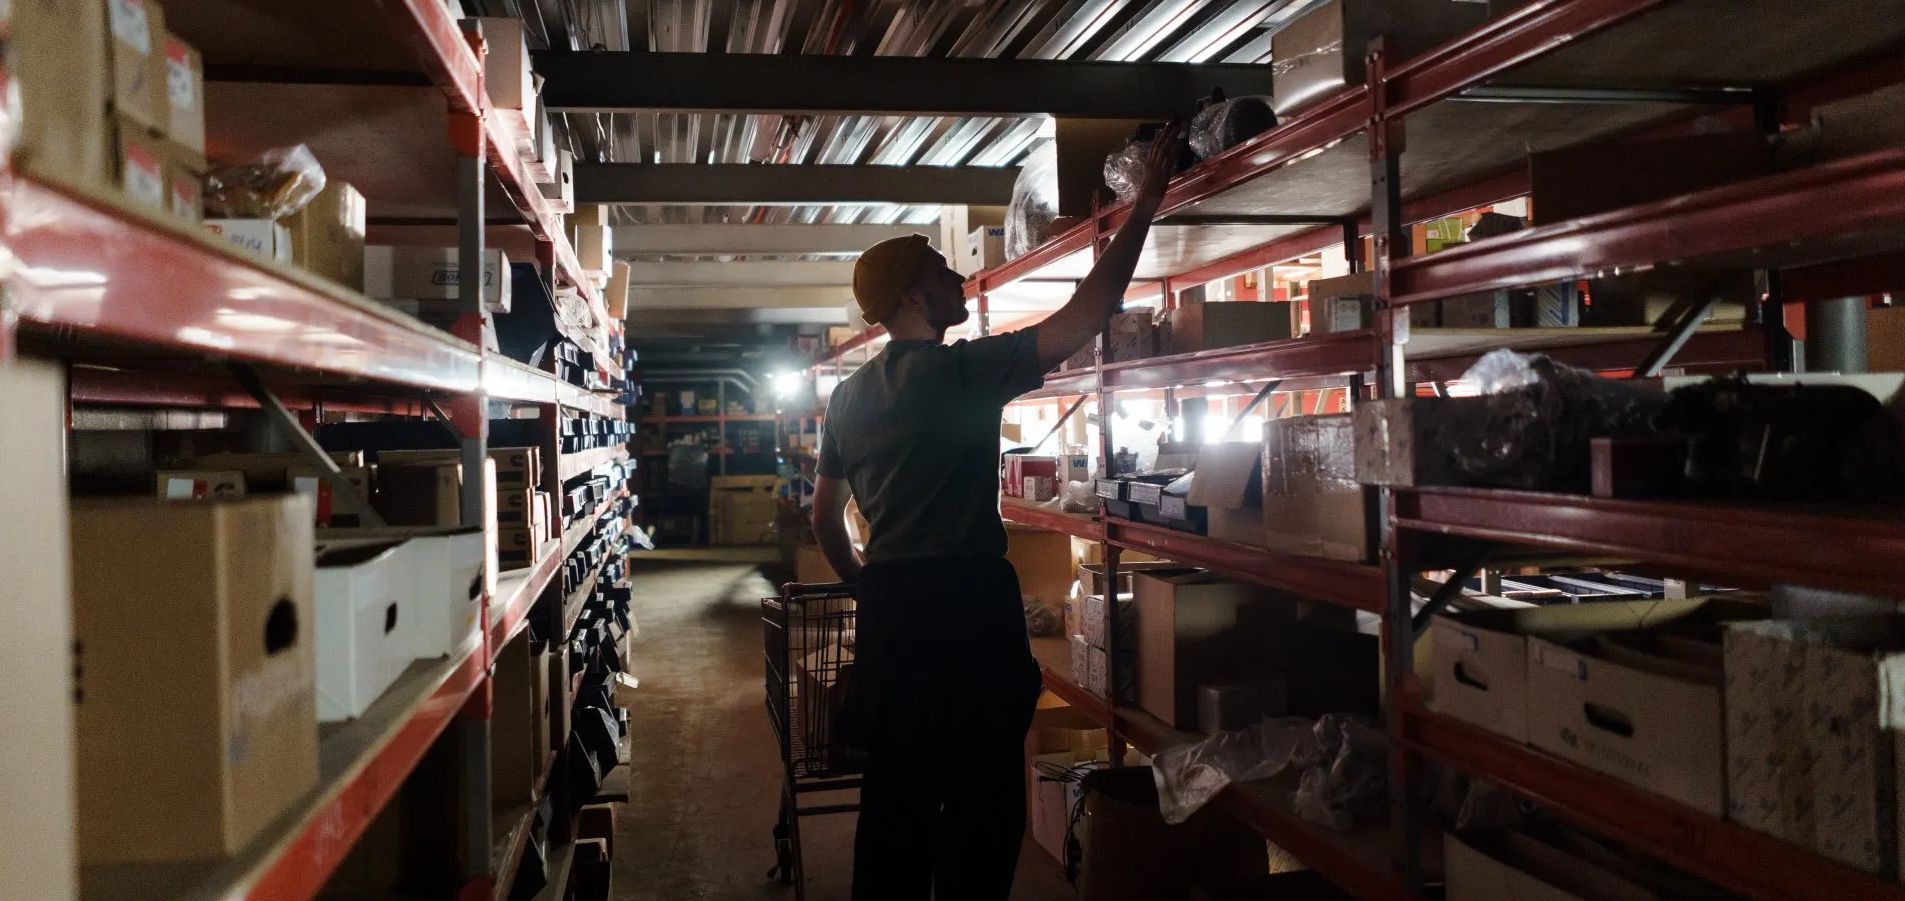 This is an image of a warehouse worker performing a physical inventory count.